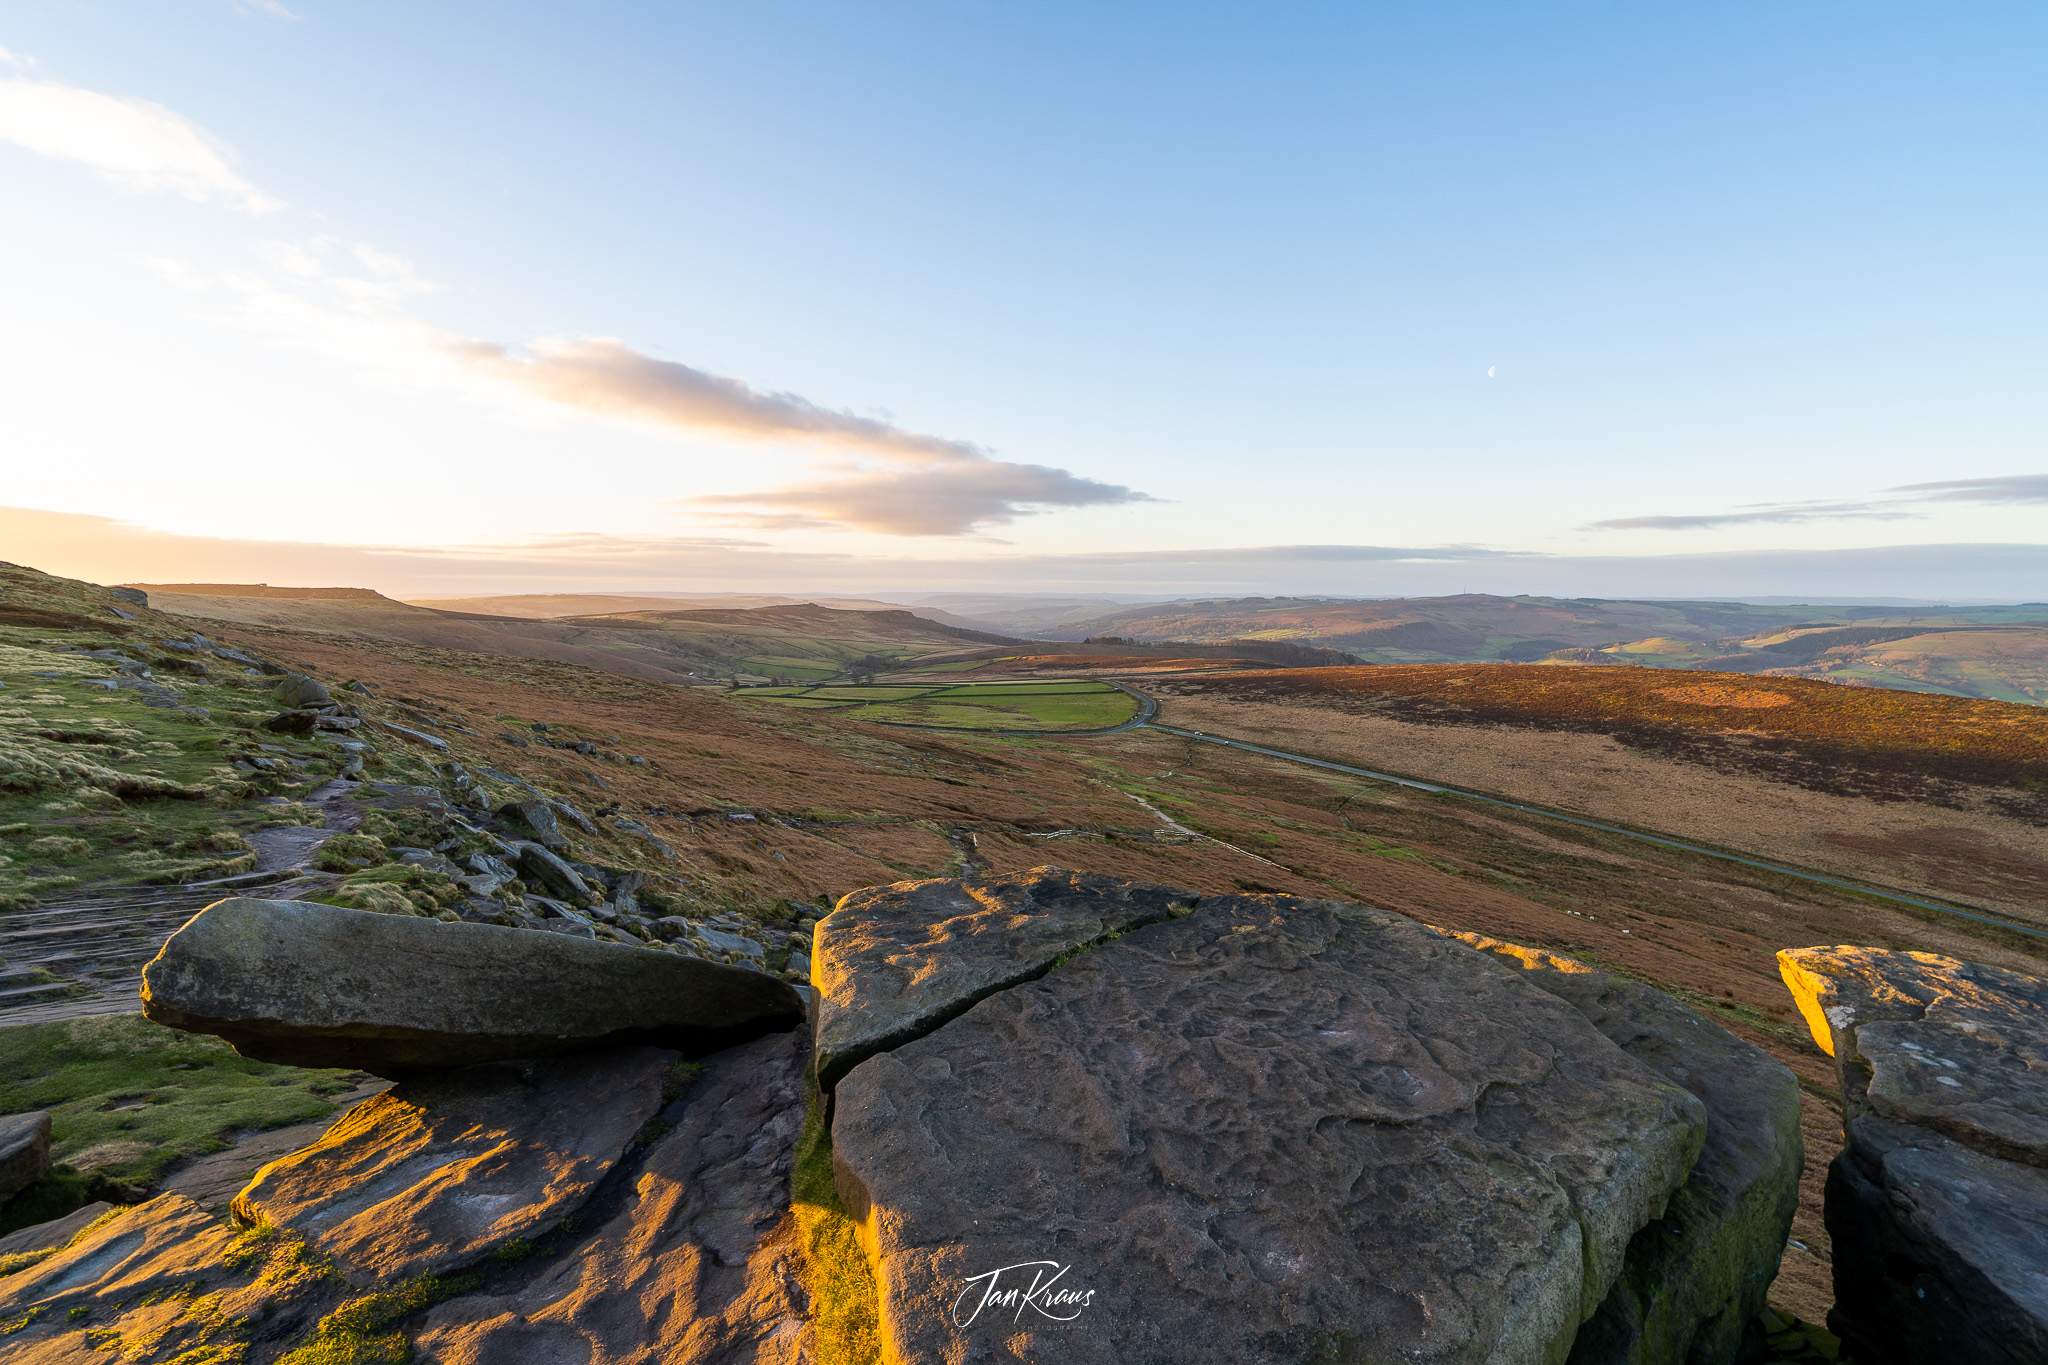 View from the side of the rocky ridge at Stanage Edge, Peak District, England, UK